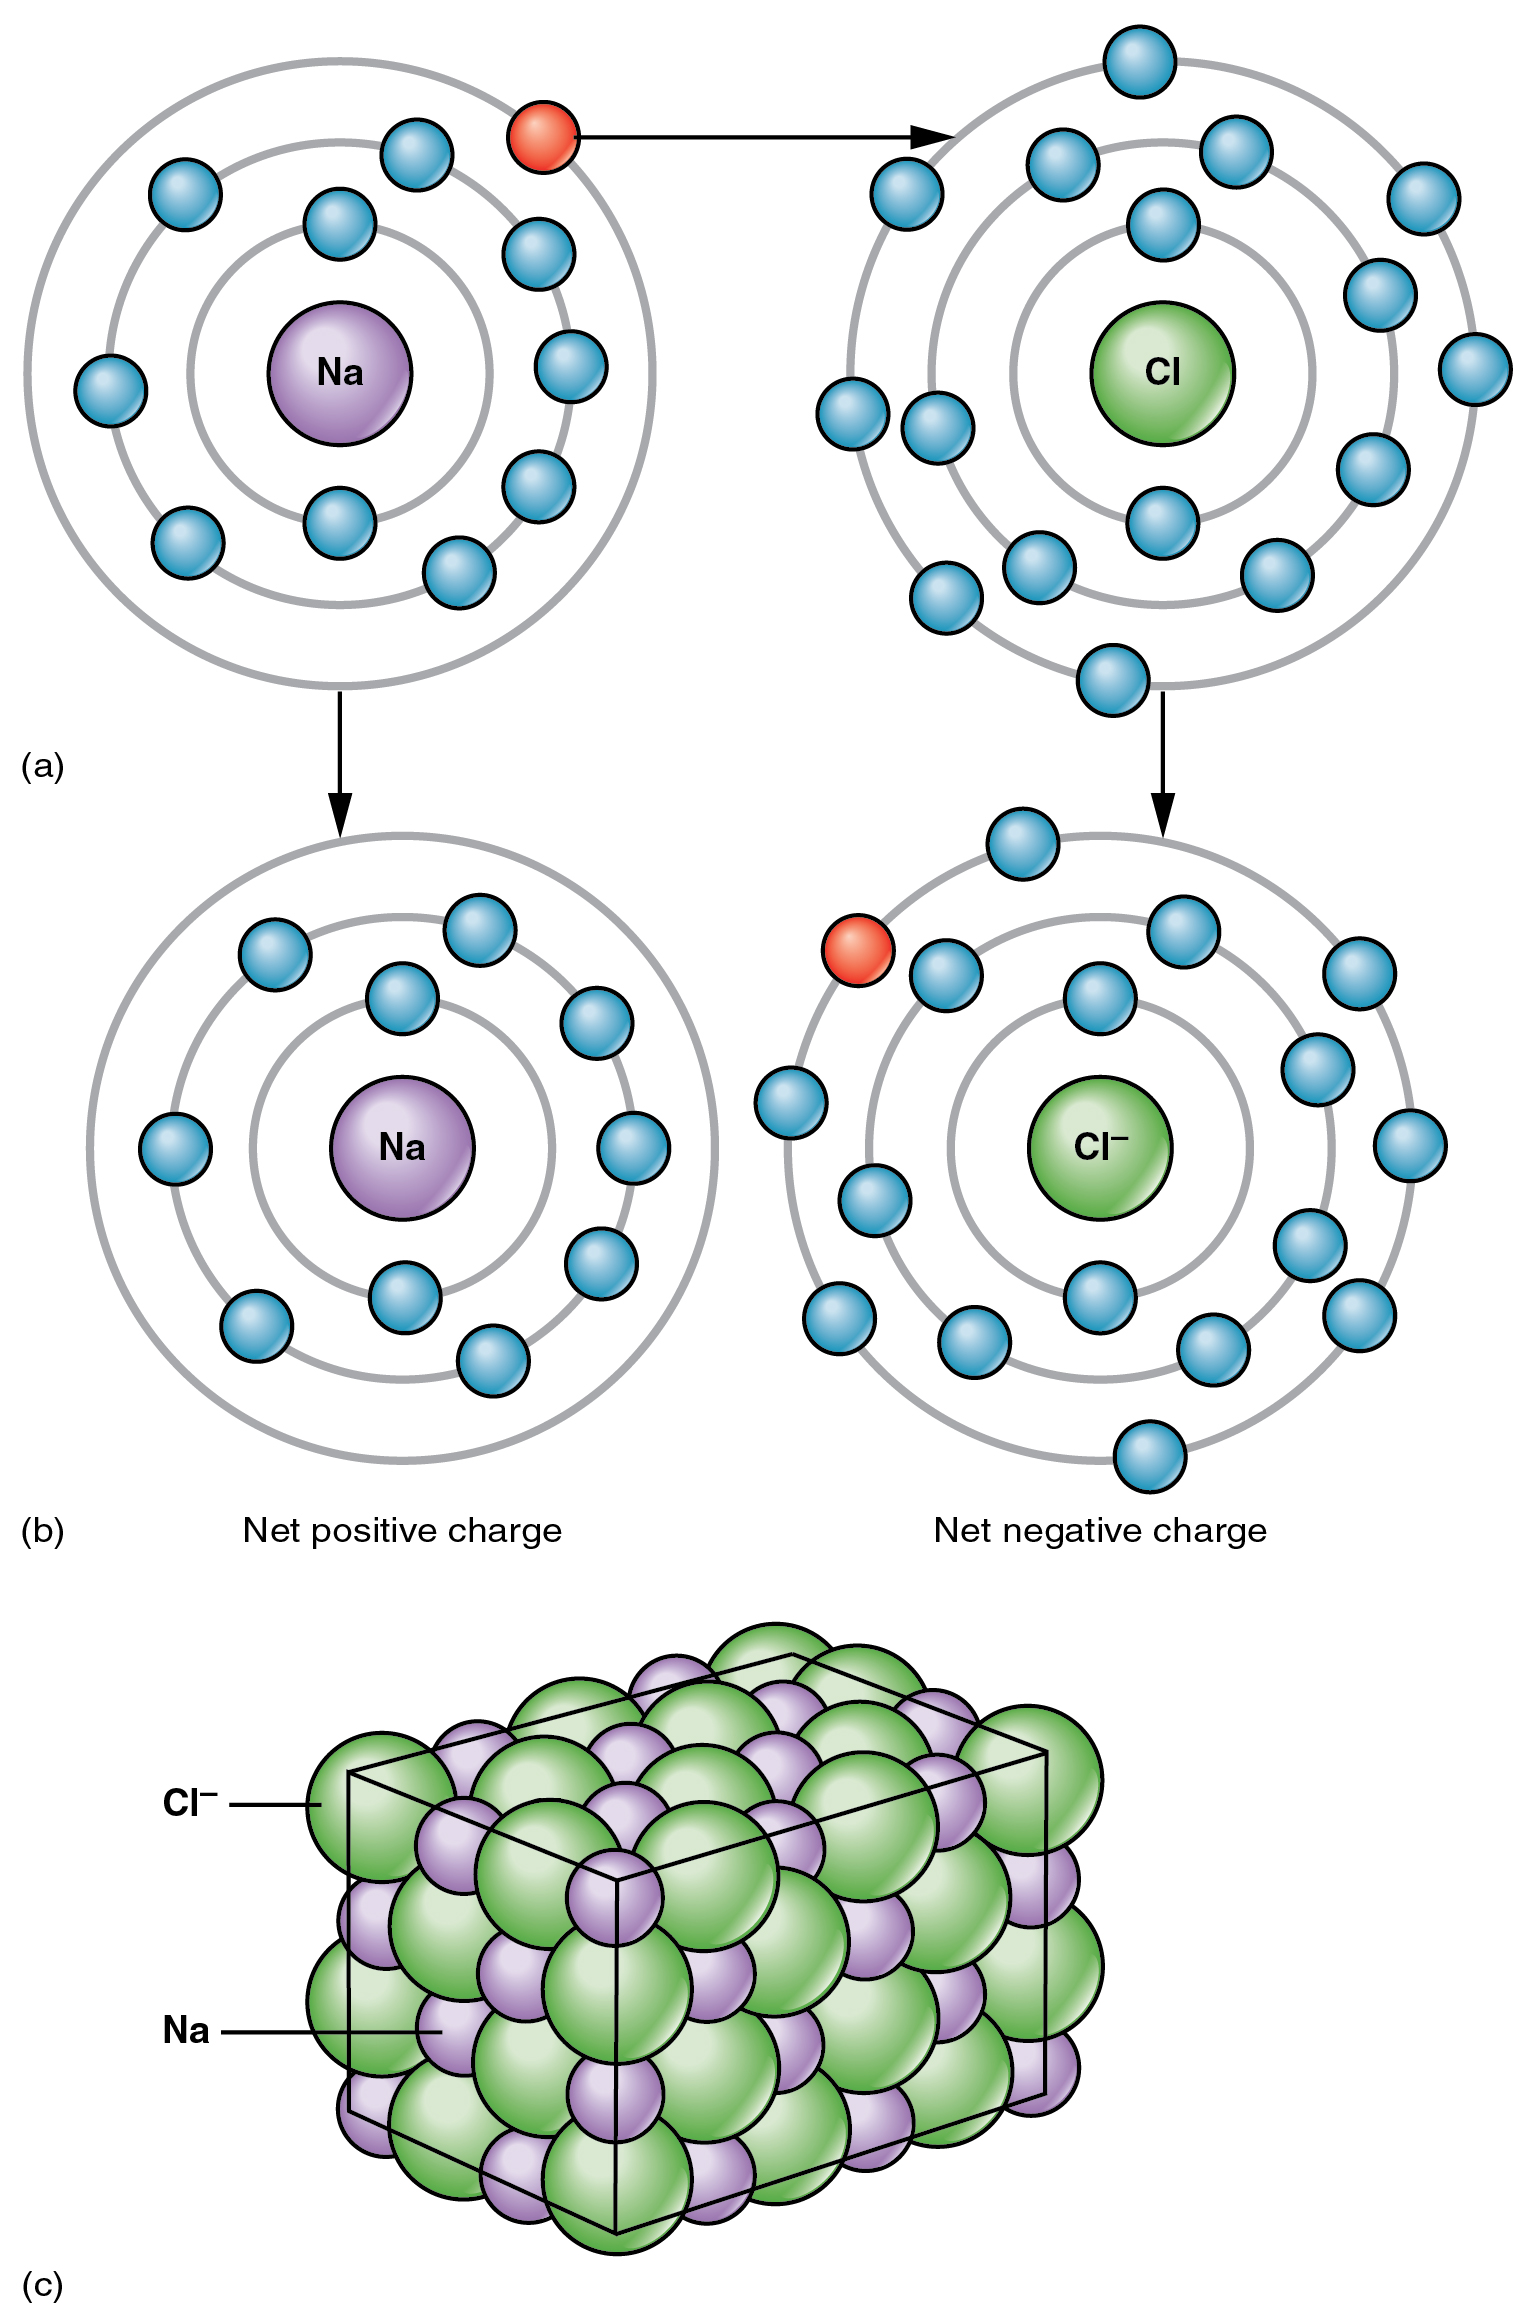 The top panel of this figure shows the orbit model of a sodium atom and a chlorine atom and arrows pointing towards the transfer of electrons from sodium to chlorine to form sodium and chlorine ions. The bottom panel shows sodium and chloride ions in a crystal structure.